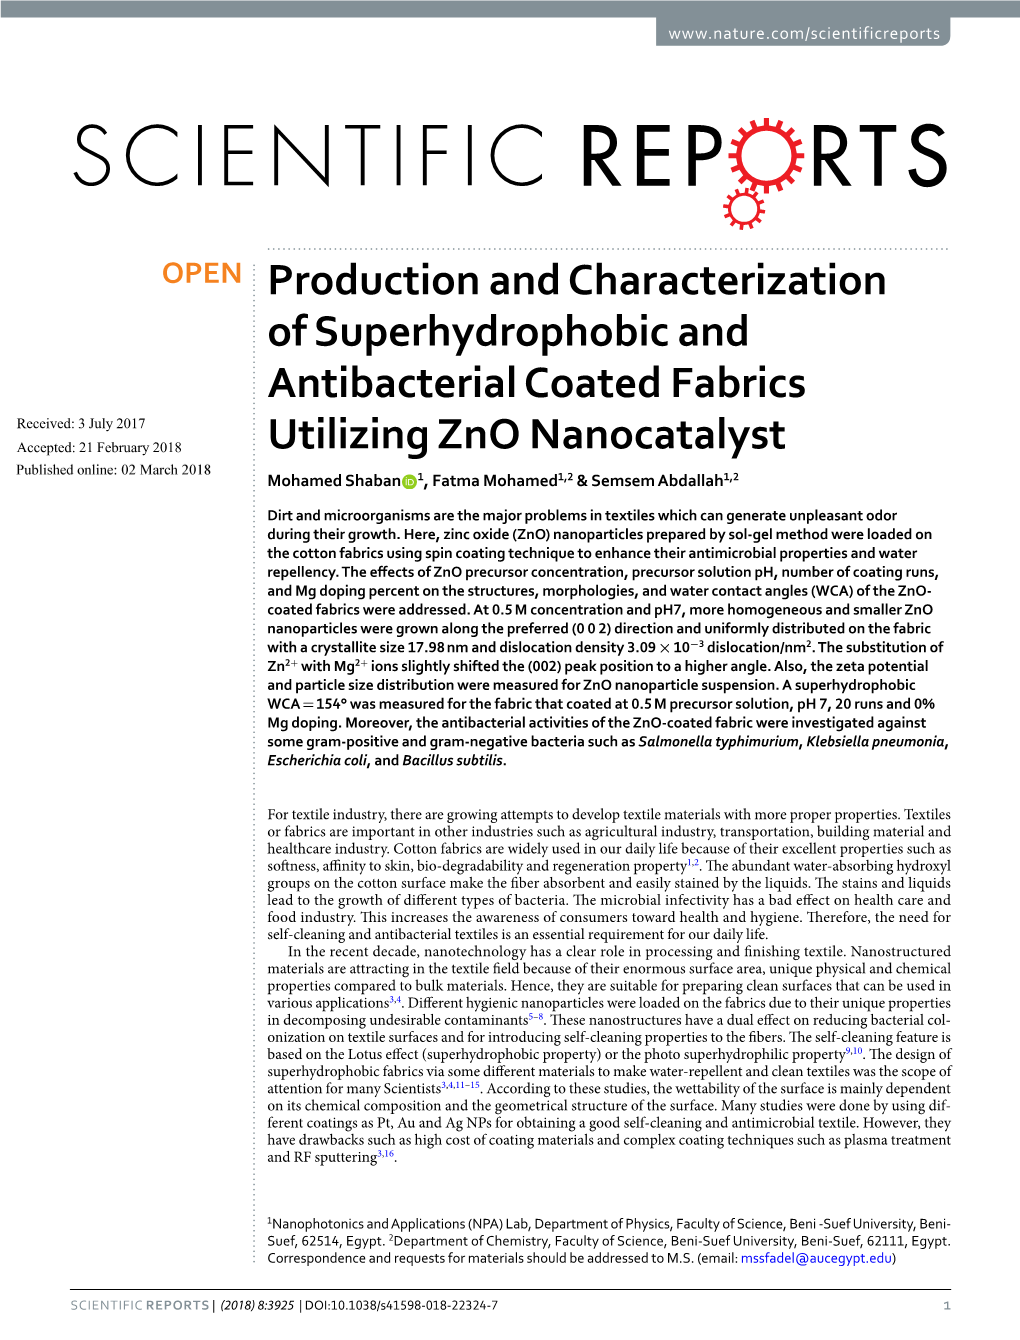 Production and Characterization of Superhydrophobic And